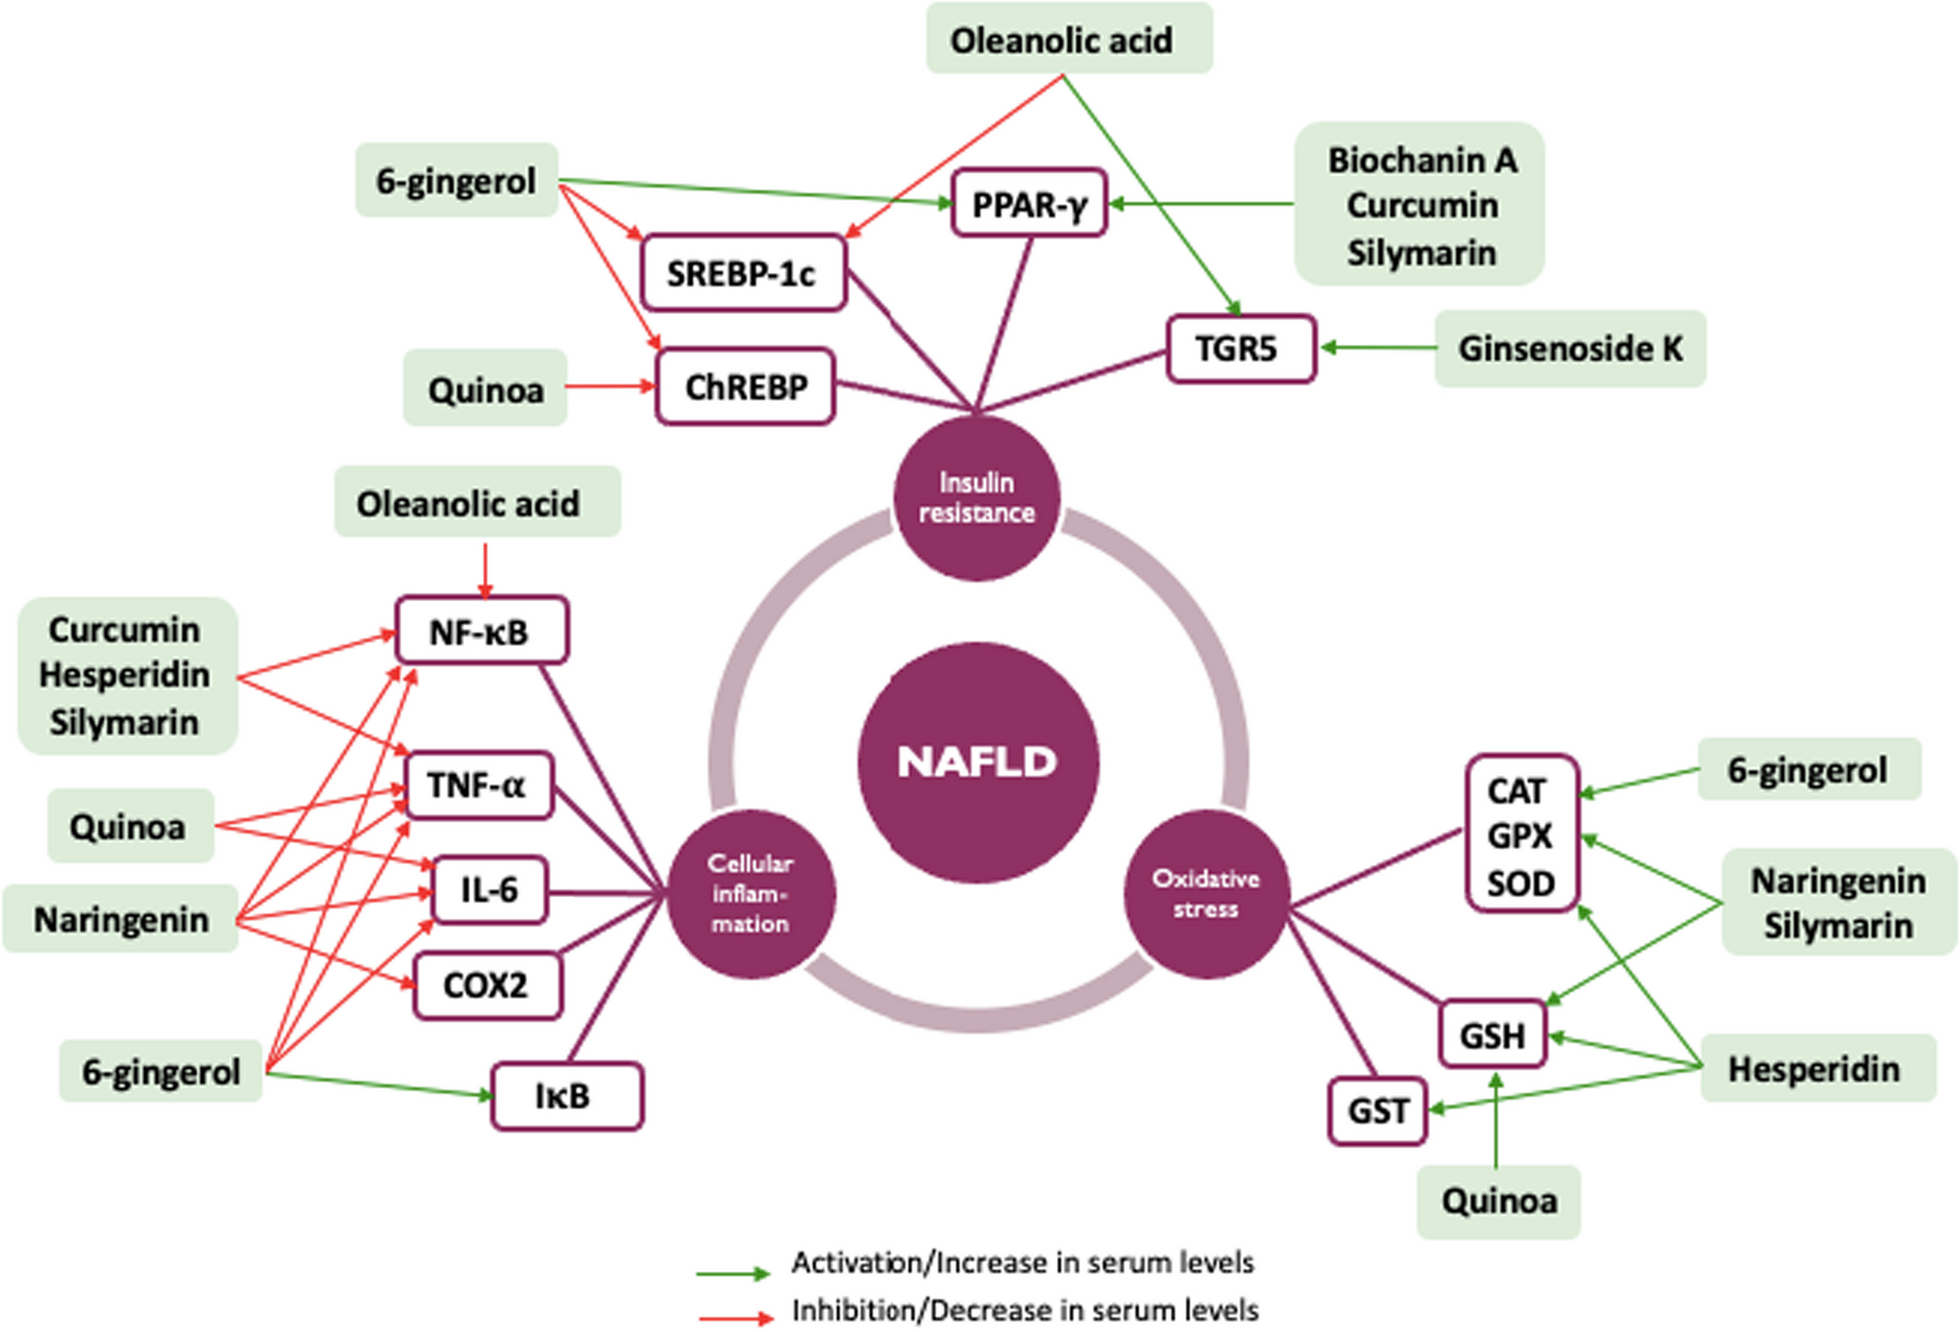 Natural compounds proposed for the management of non-alcoholic fatty liver disease